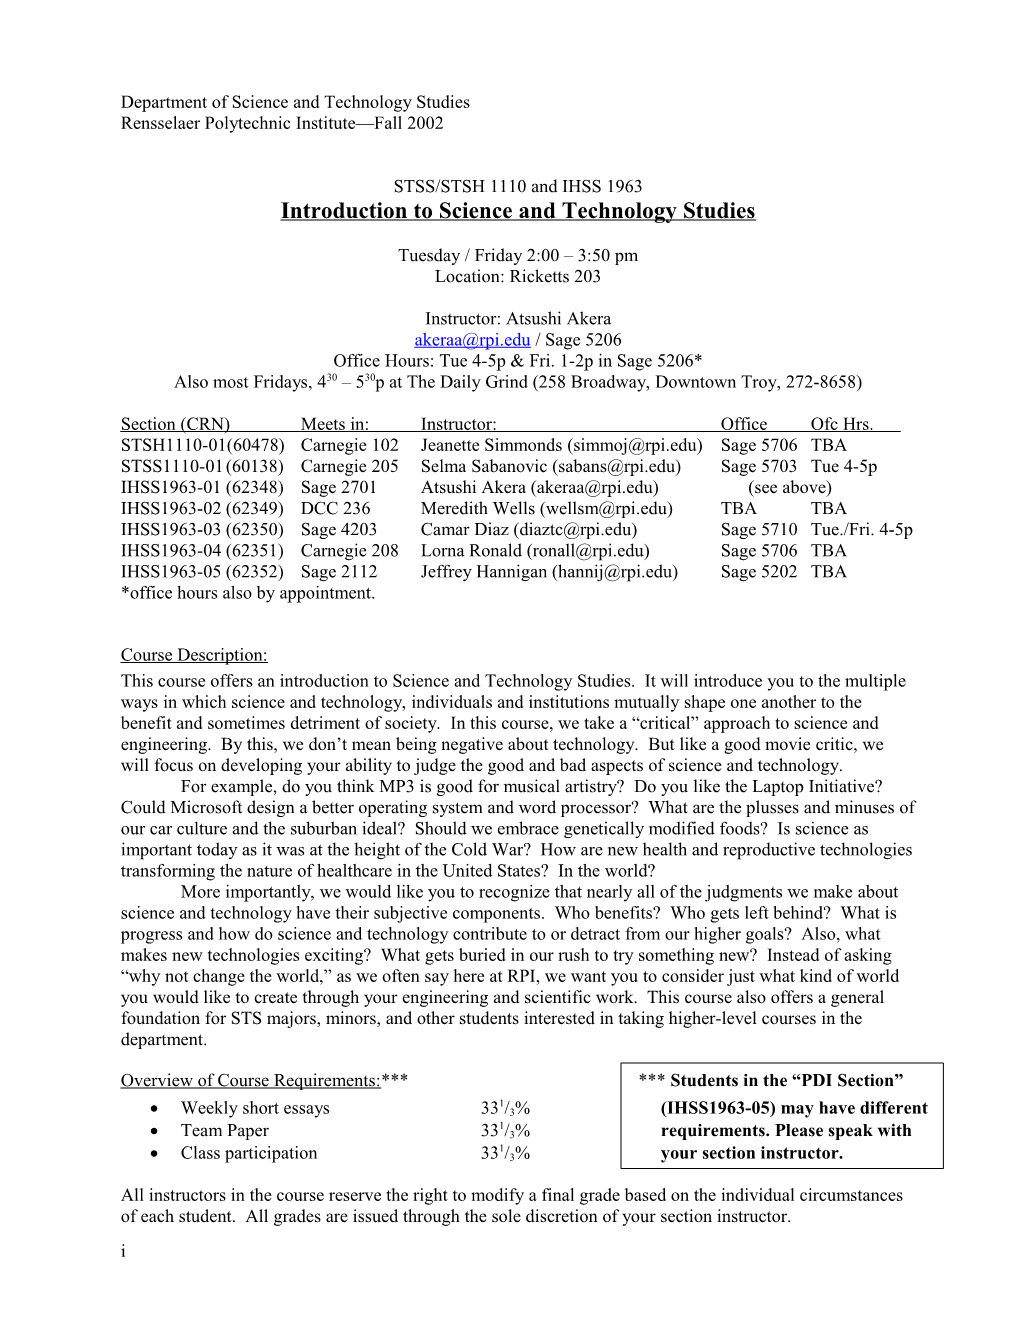 Intro to STS Syllabus (Fall 2001)